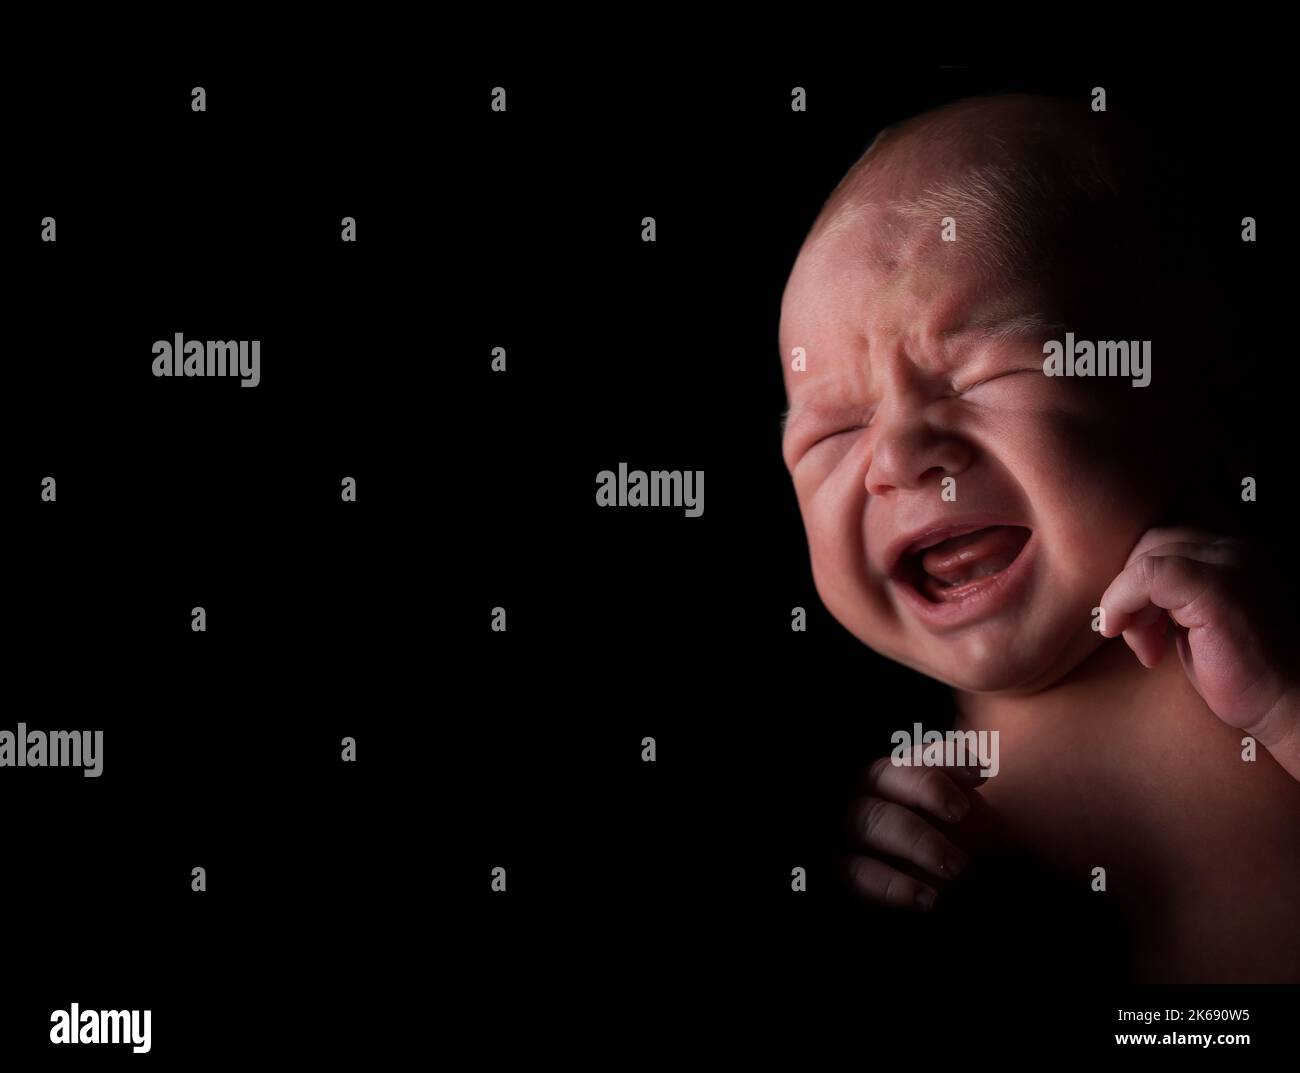 Baby boy with a crying expression in a dark looking environment. Stock Photo